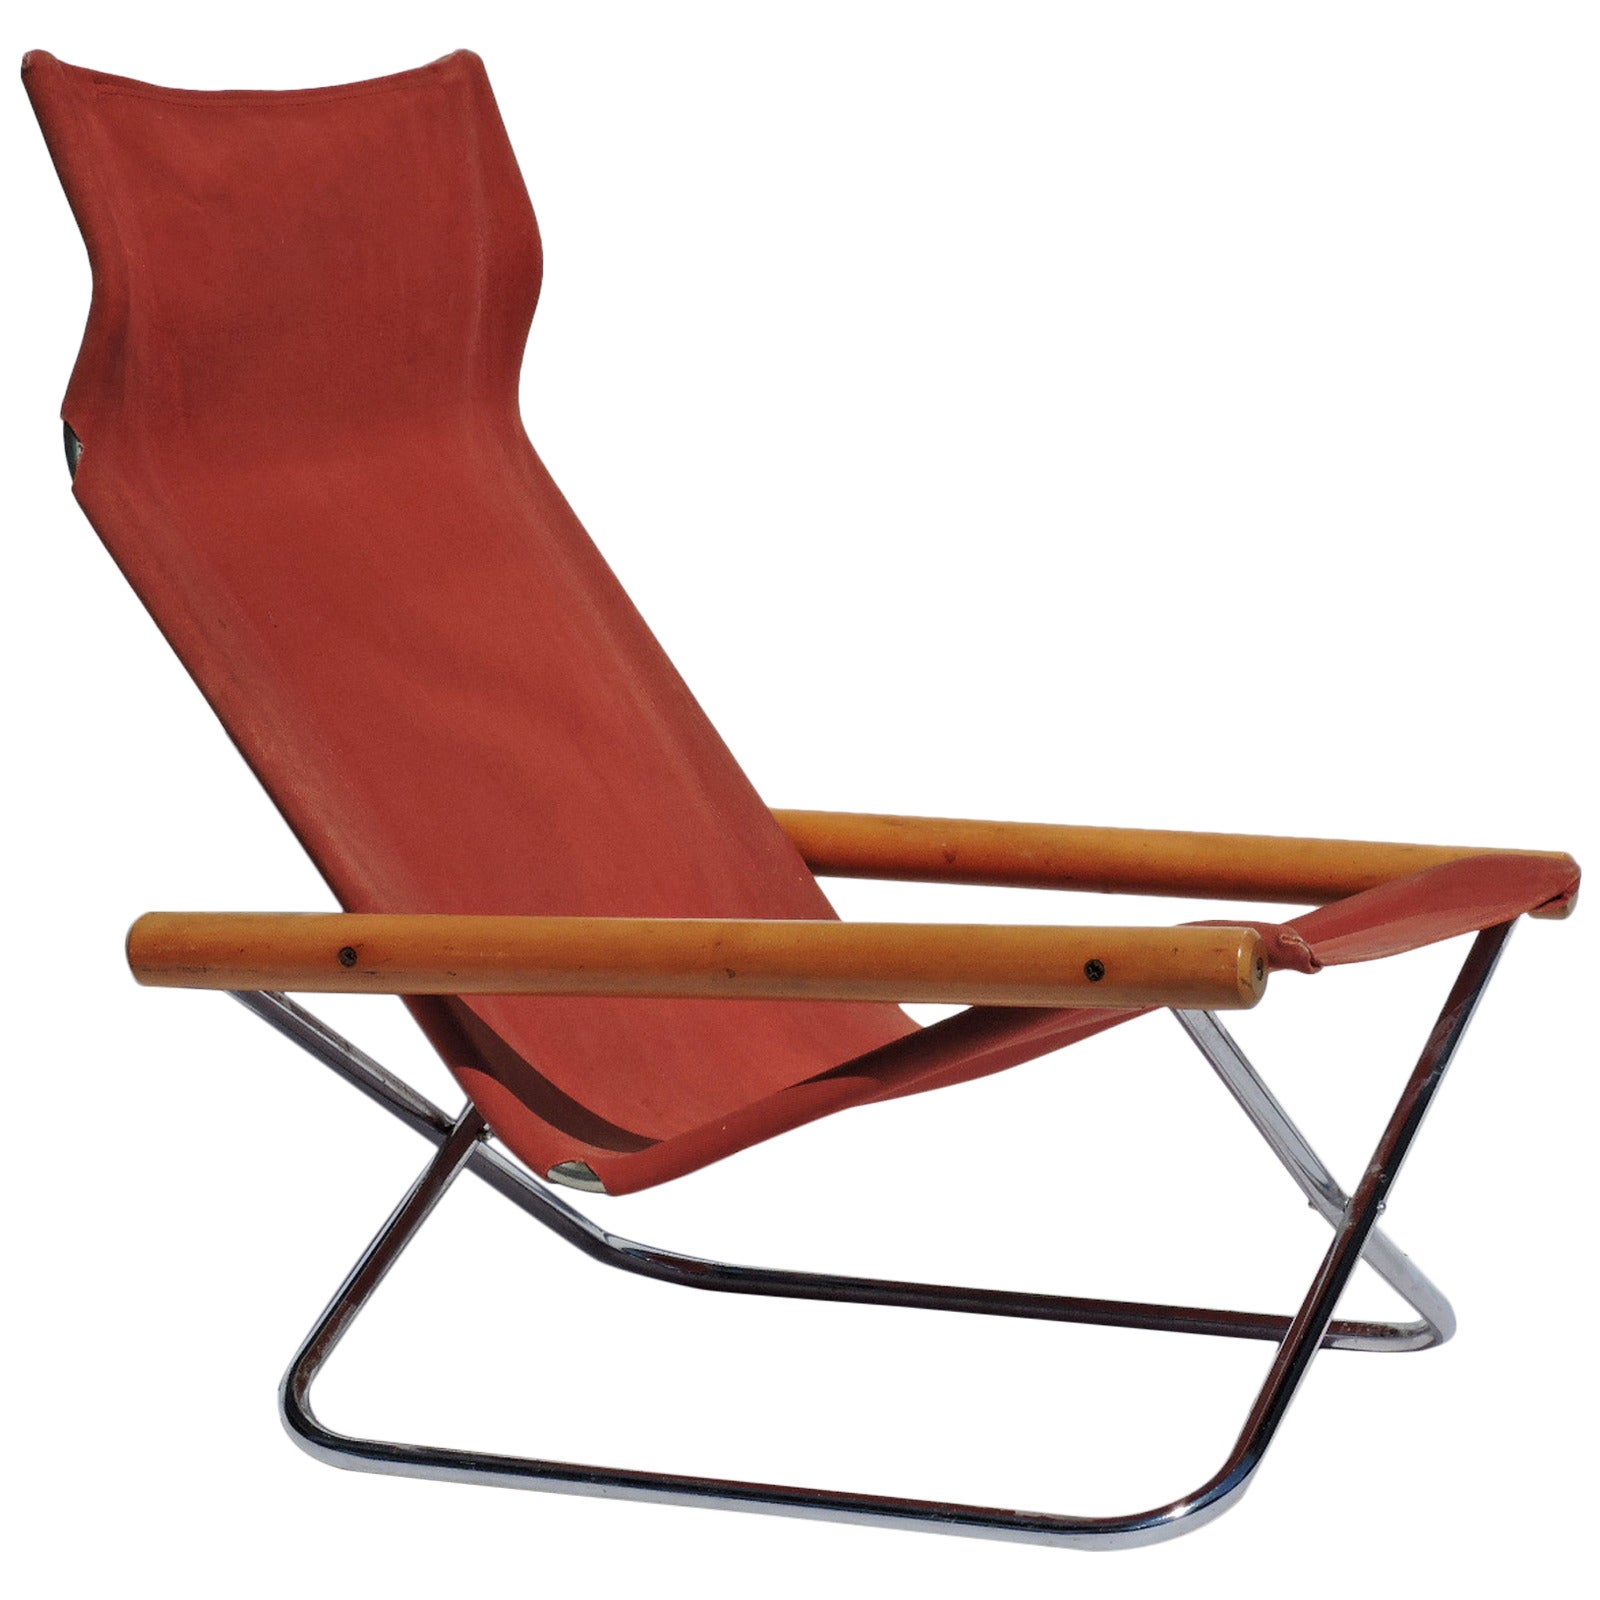 NY Folding Chair by Takeshi Nii, Japan, 1958